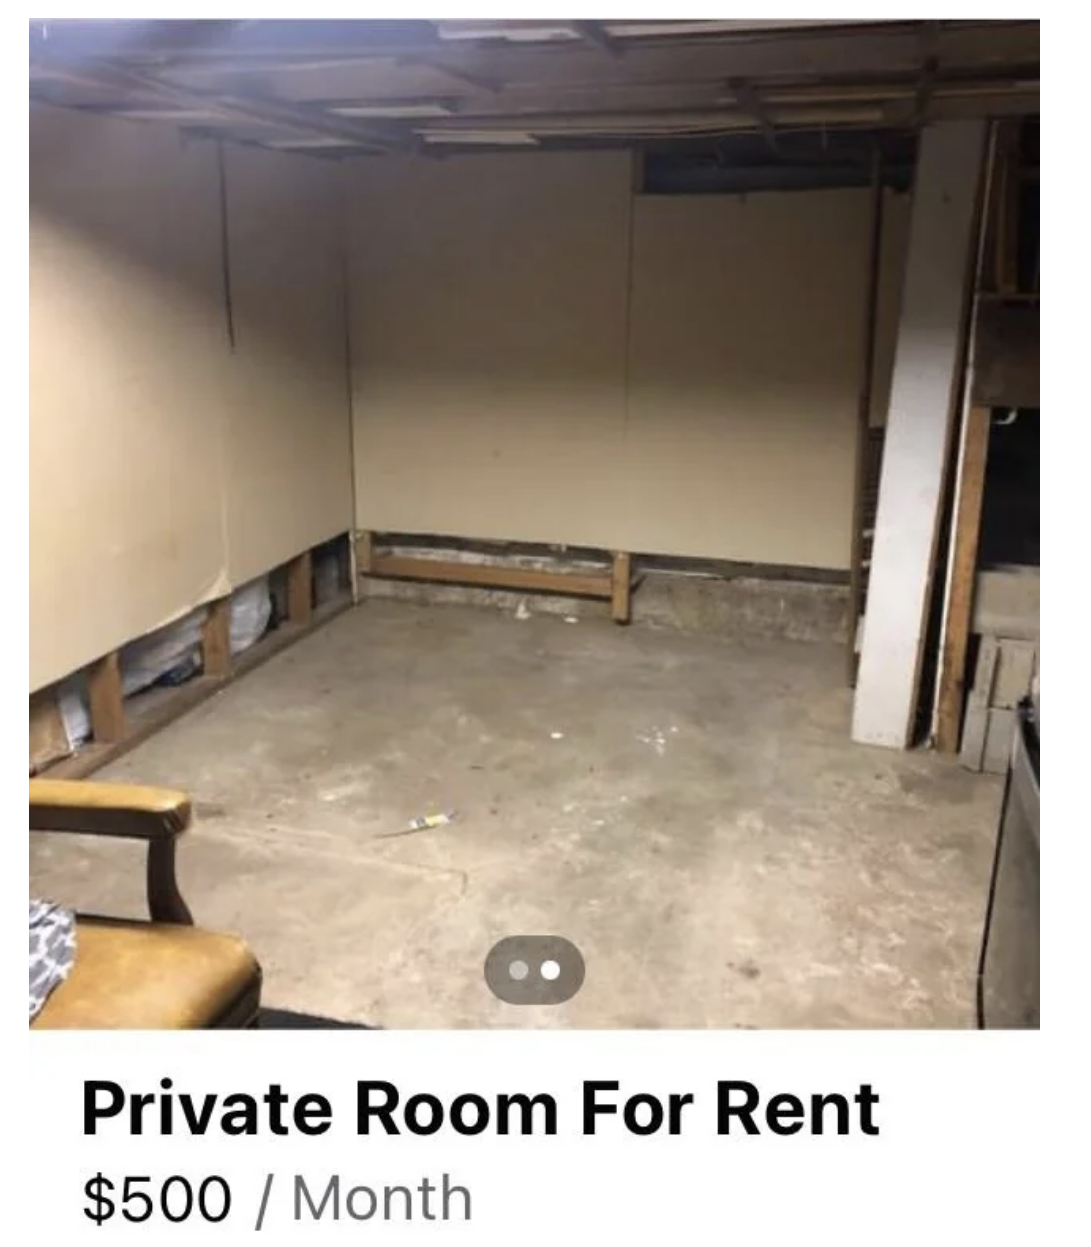 room with unfinished floors and walls for rent for $500 a month